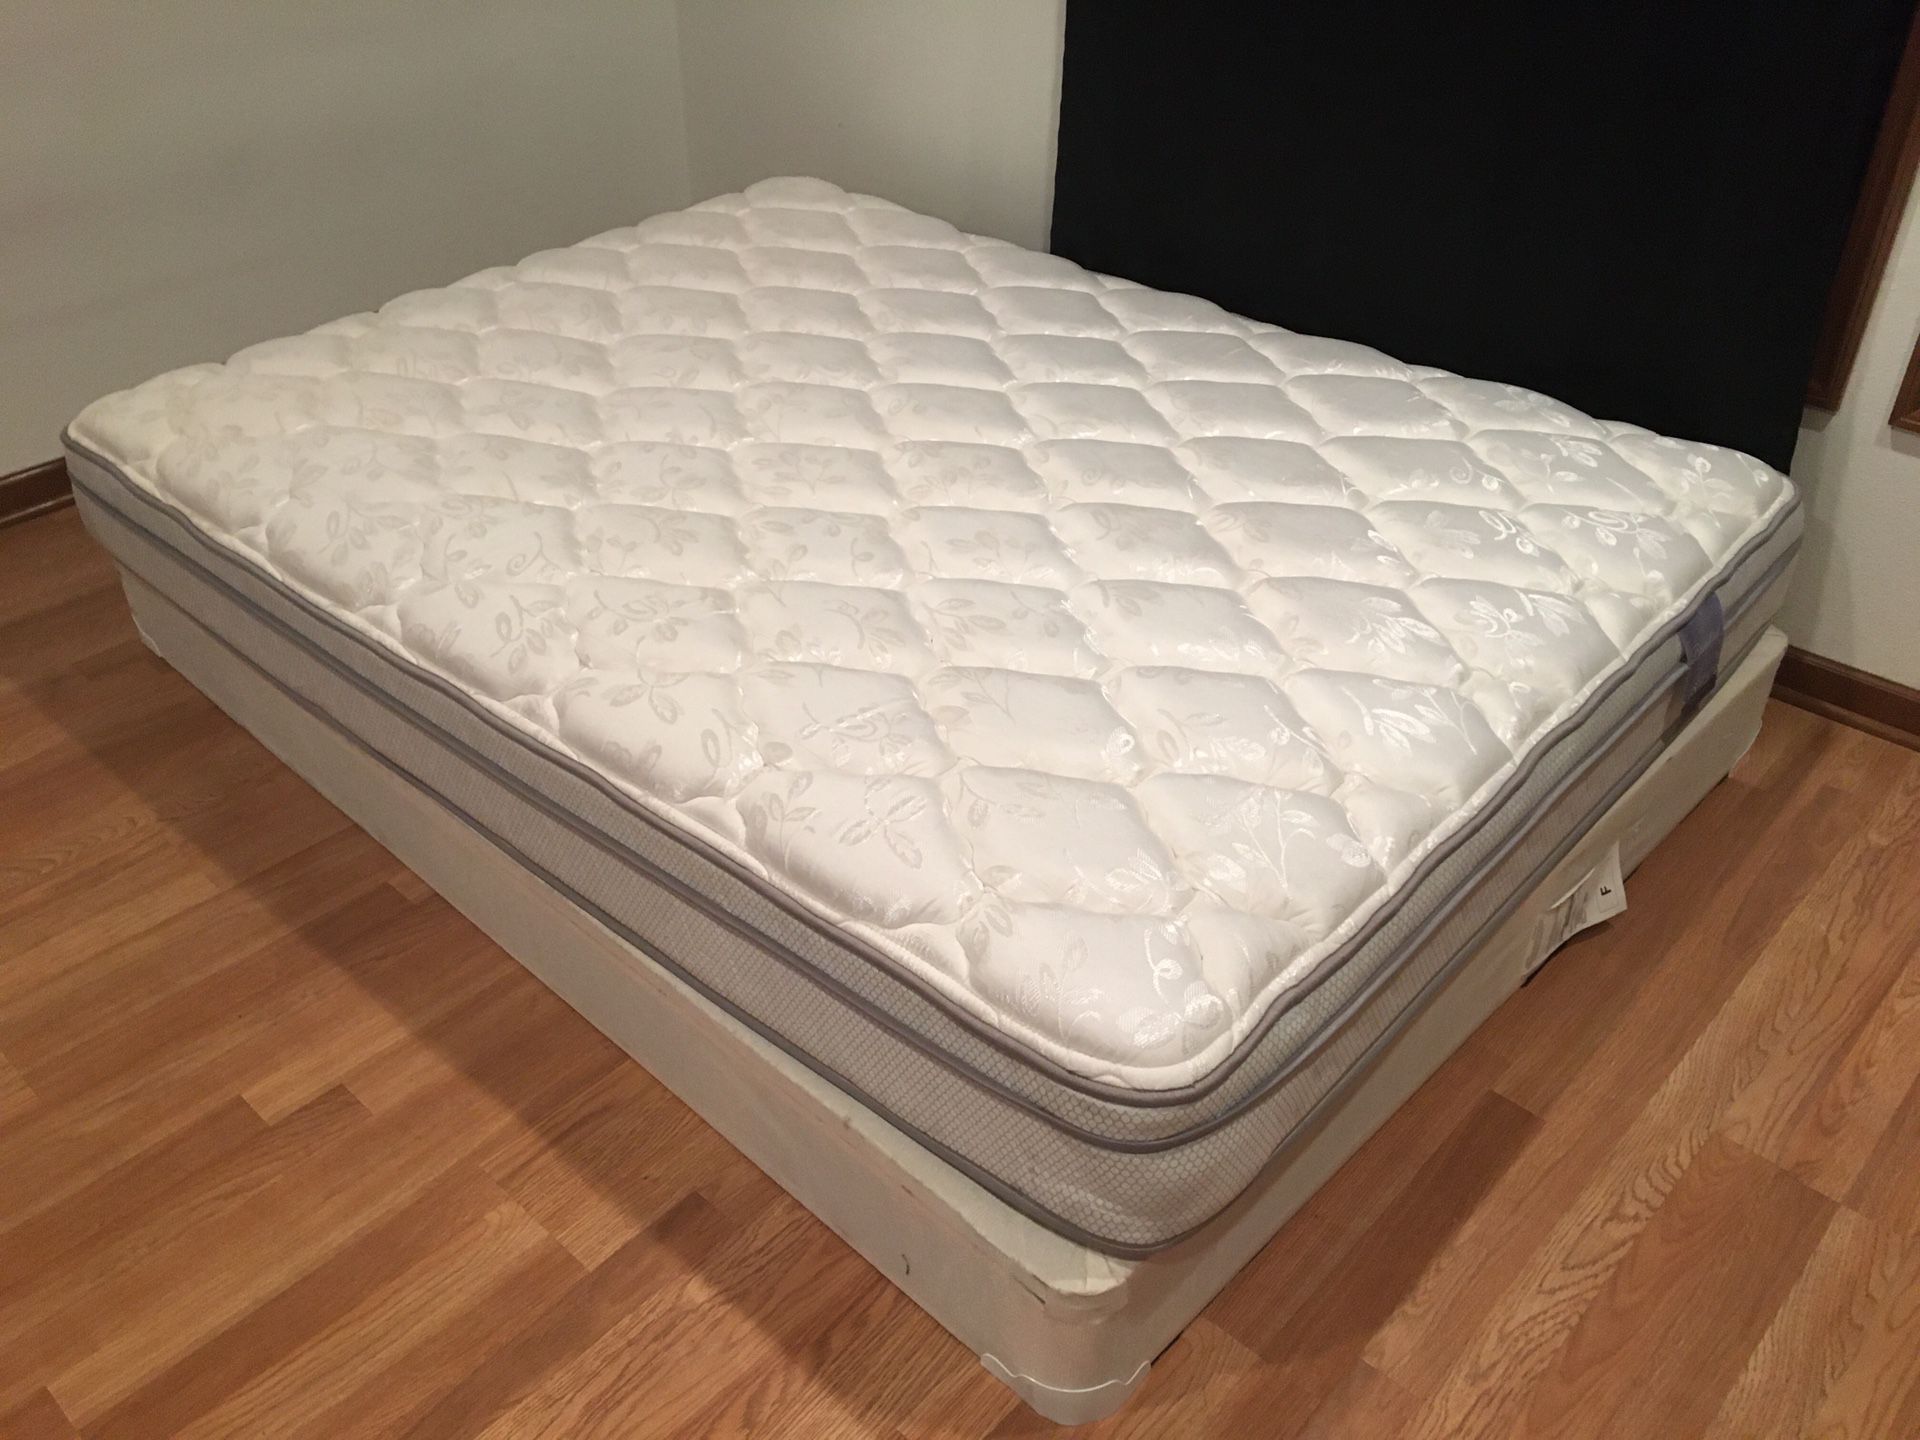 Mattress & Boxspring - (queen pillow top) never been used